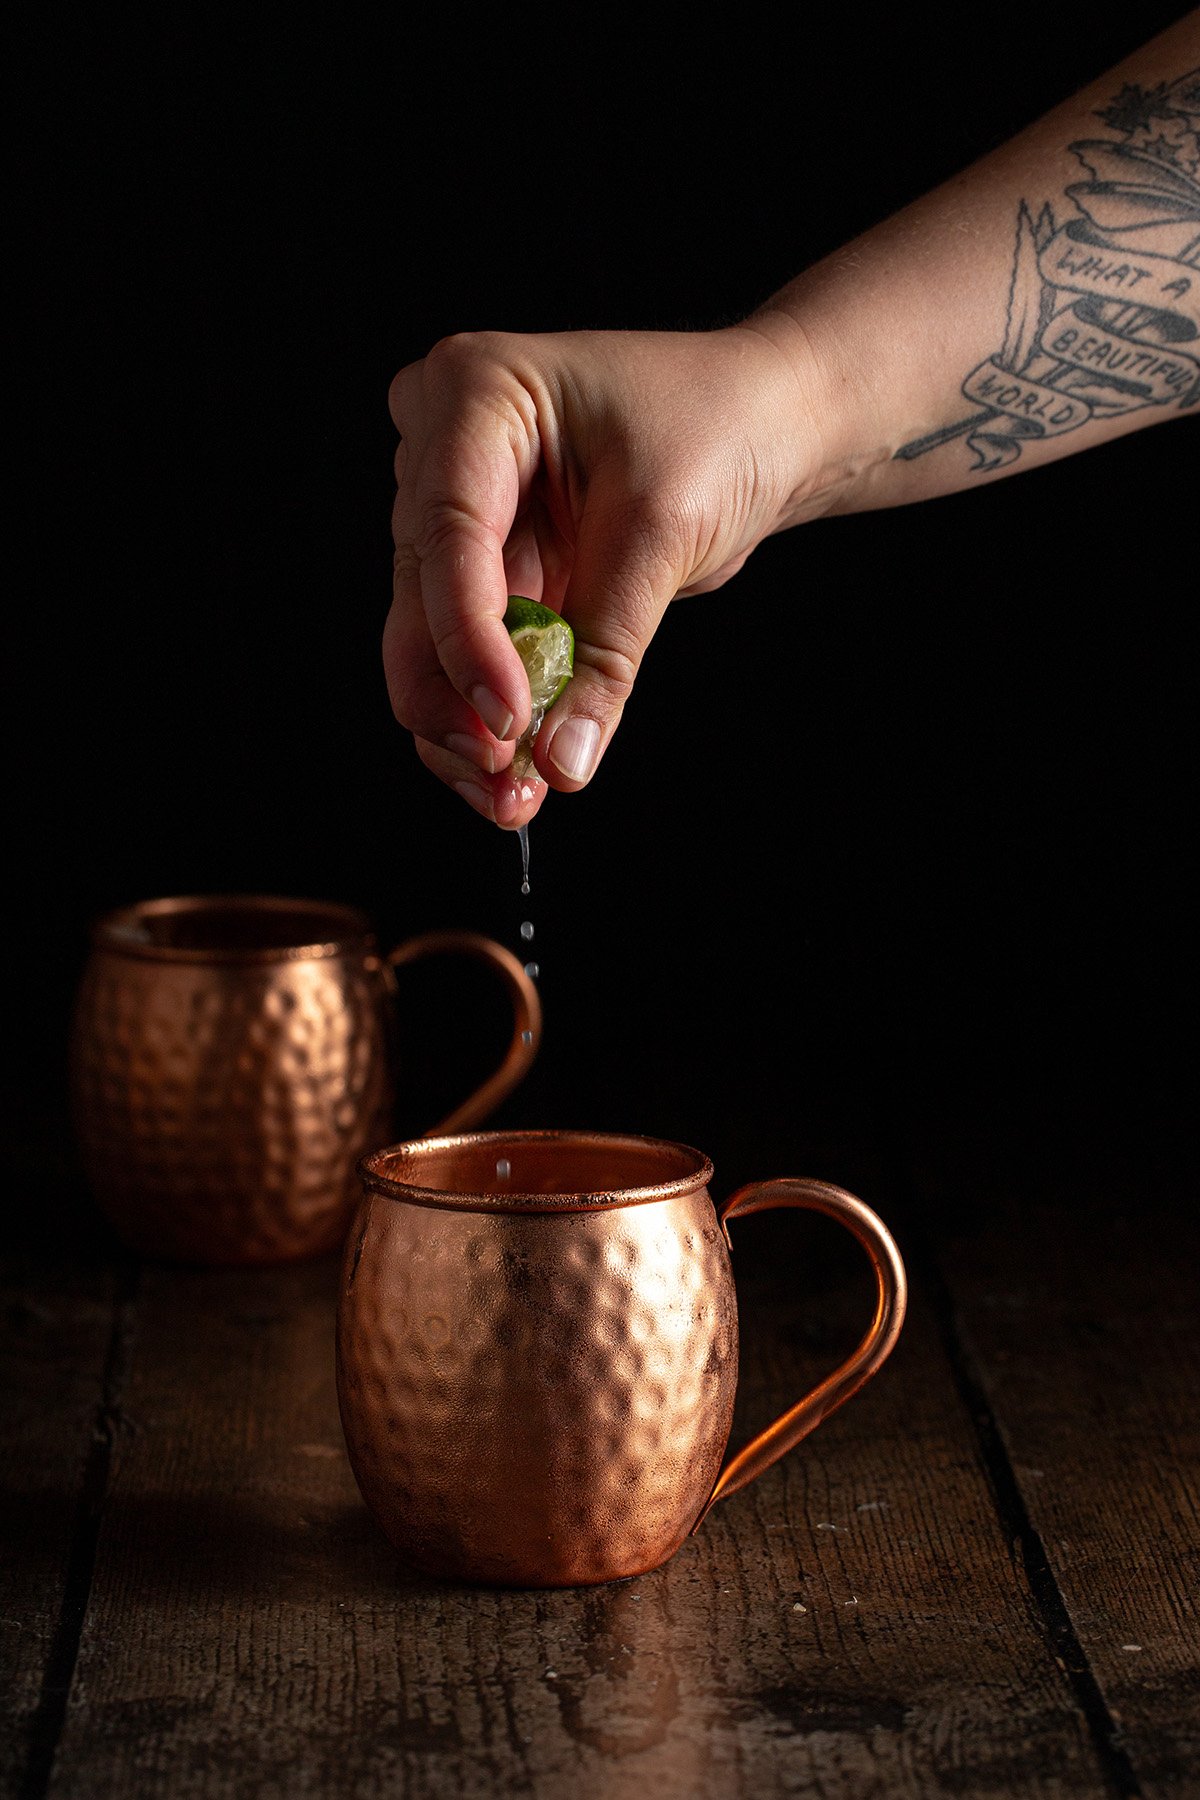 lime juice being squeezed into a copper mug.